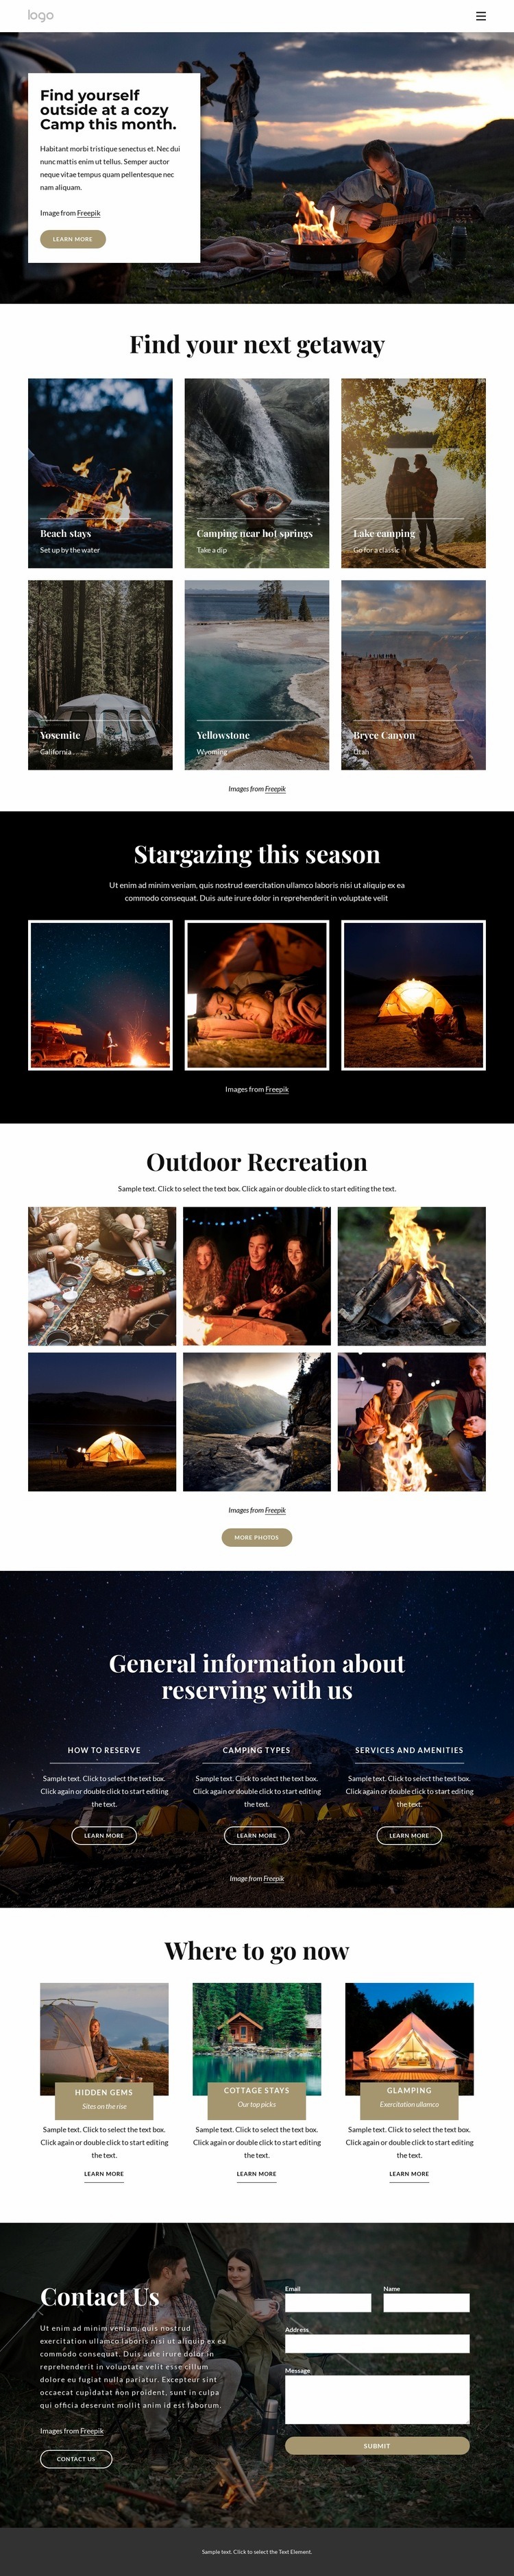 Going on a camping trip Homepage Design